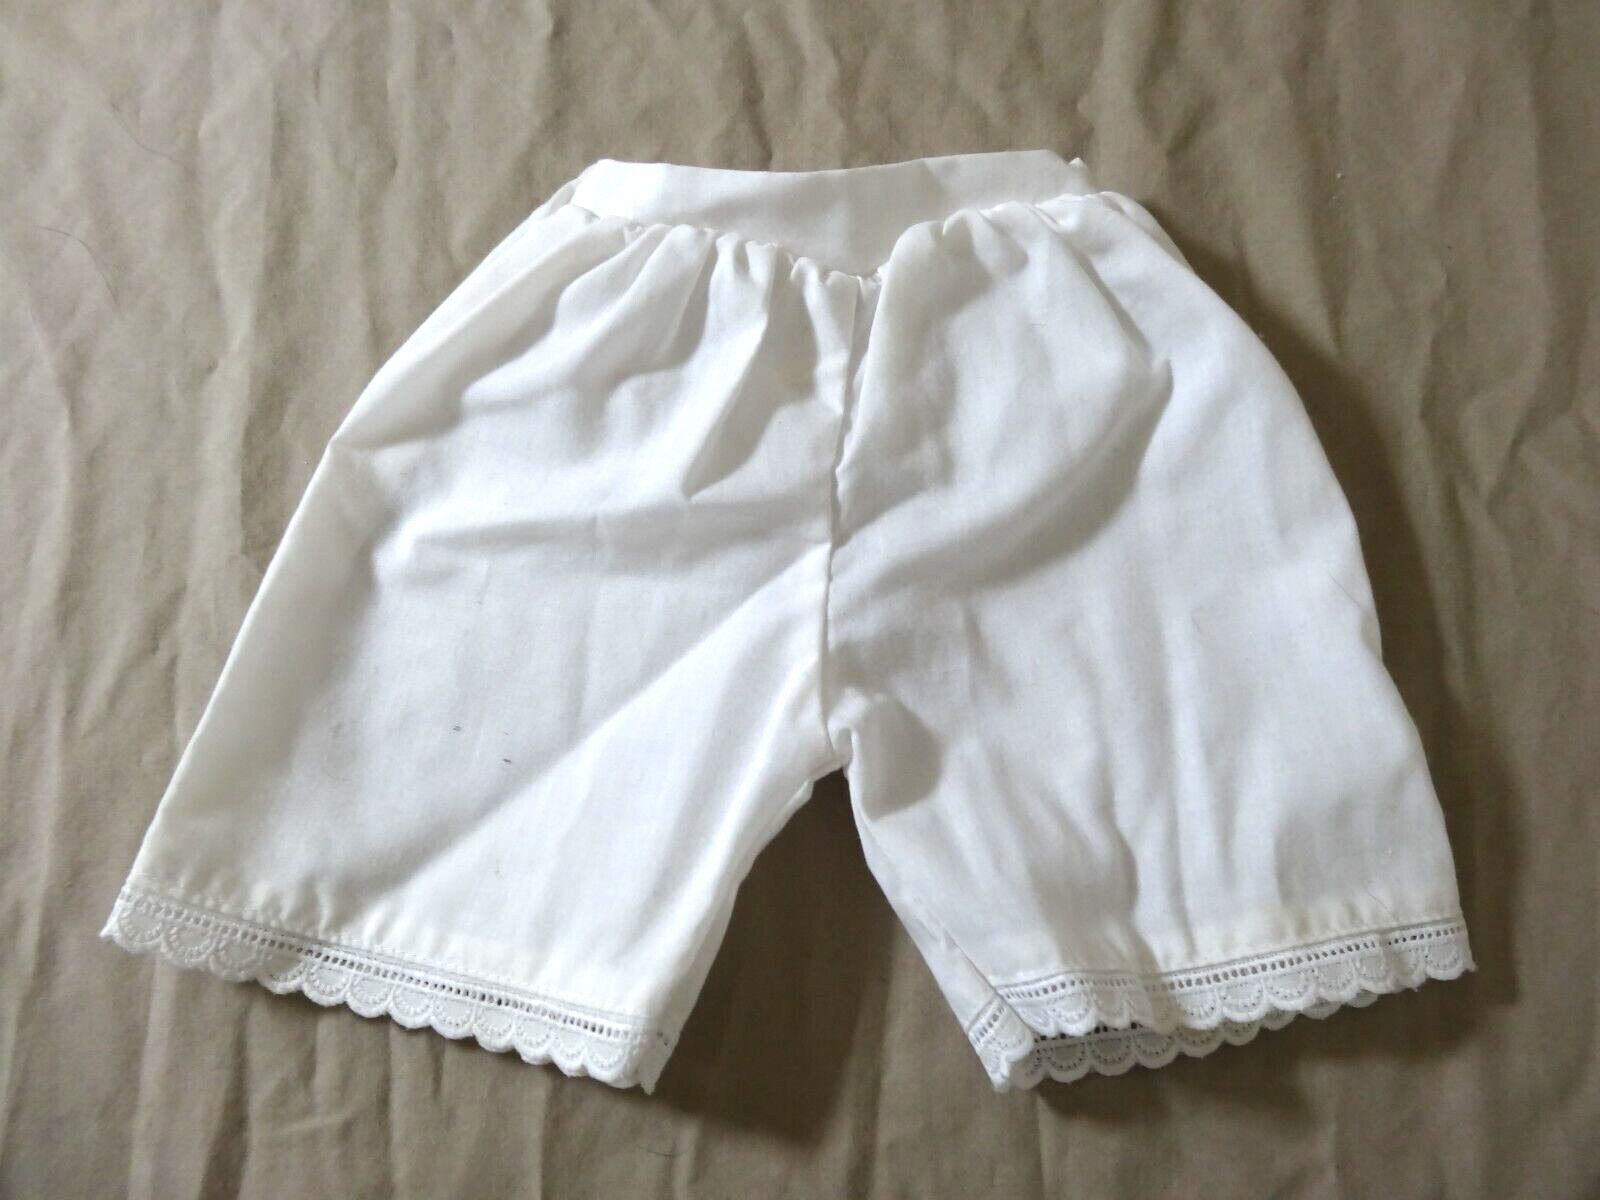 American girl doll pleasant company Addy bloomers 1993 From Meet Outfit - $17.84